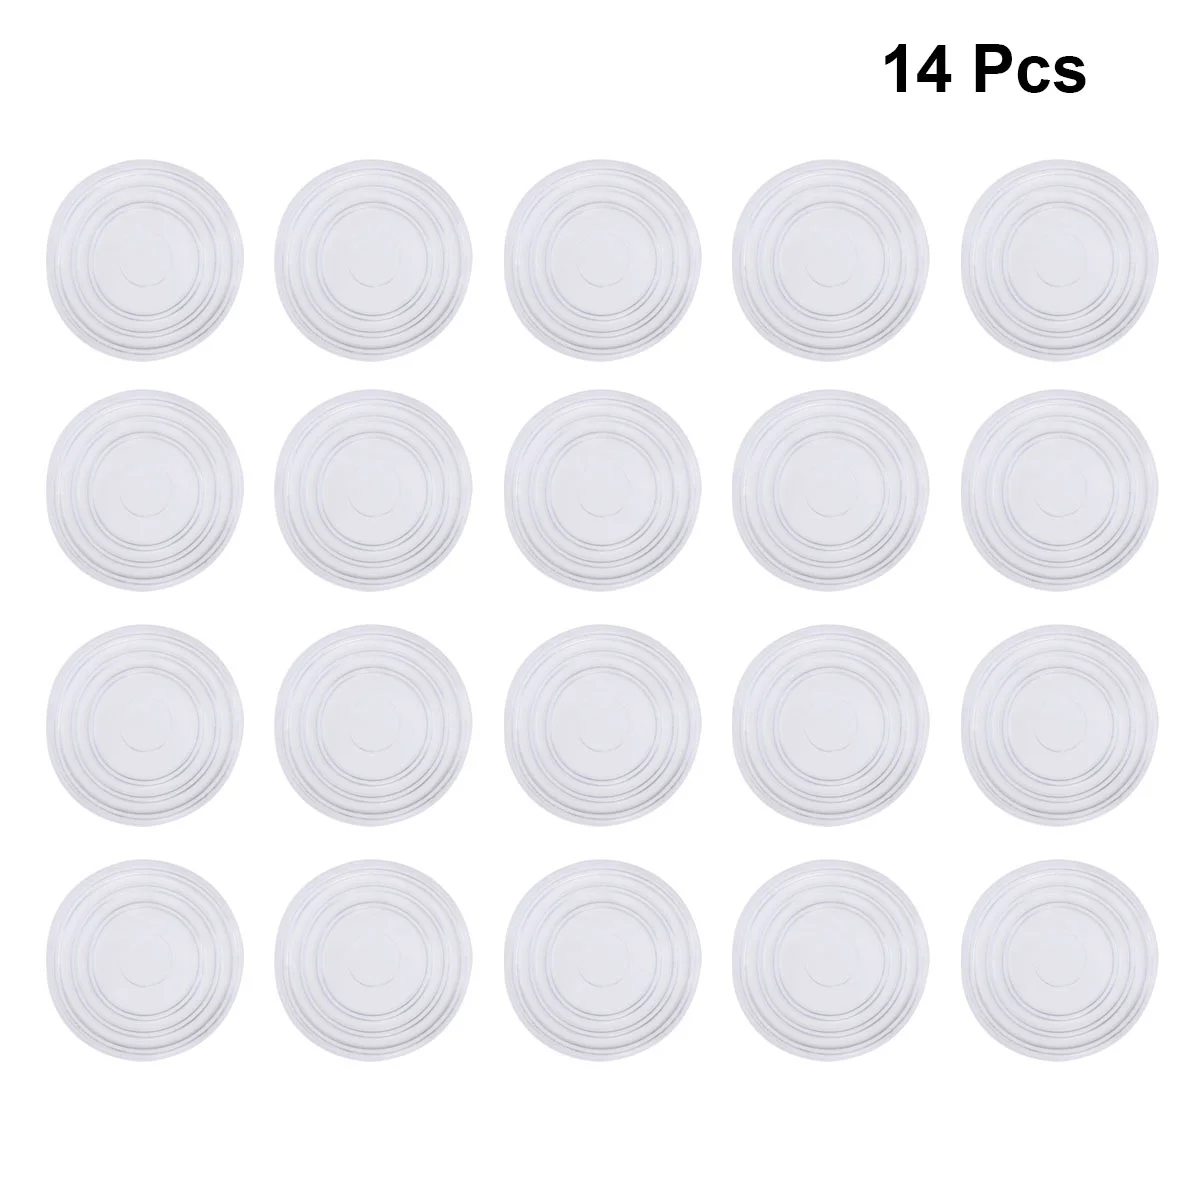 

18/30pcs Round Shape Glass Table Non-Slip Soft Grip Pad Transparent Plastic Rubber Fixed Tempered Glass Furniture Accessories